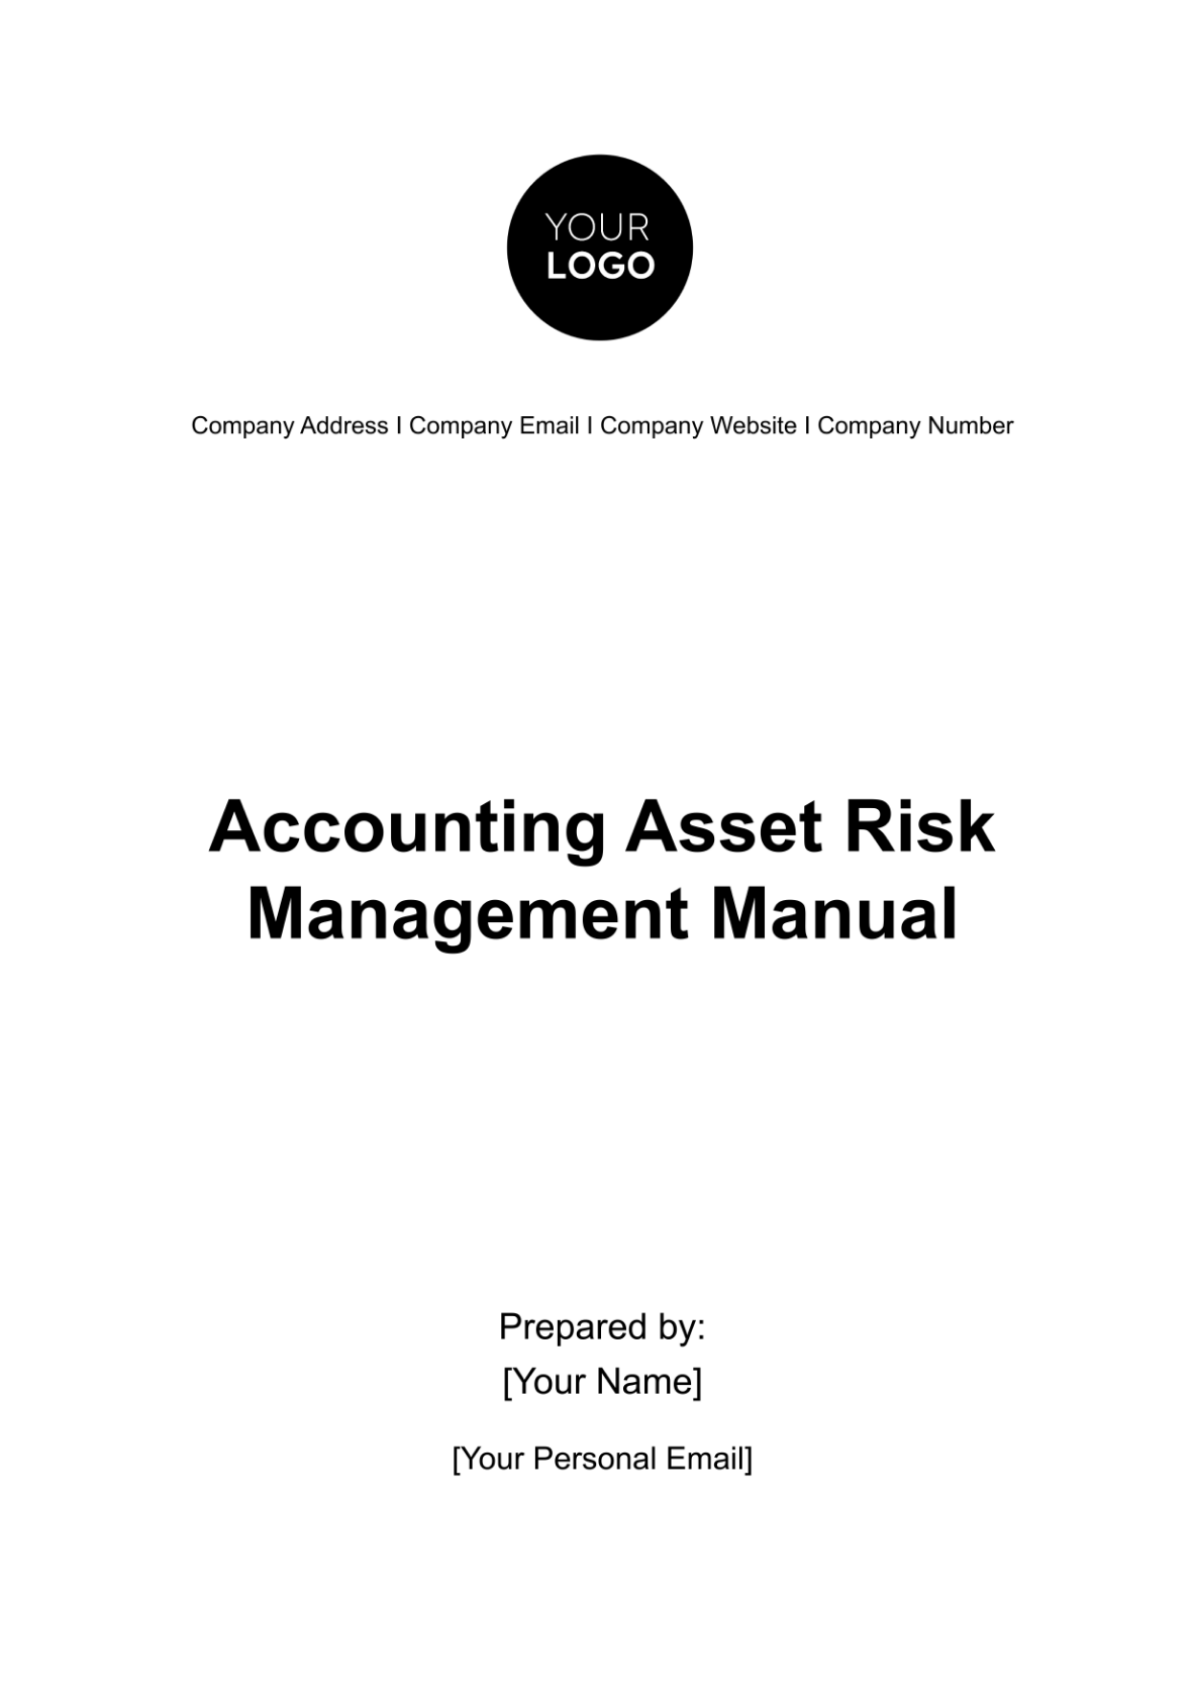 Accounting Asset Risk Management Manual Template